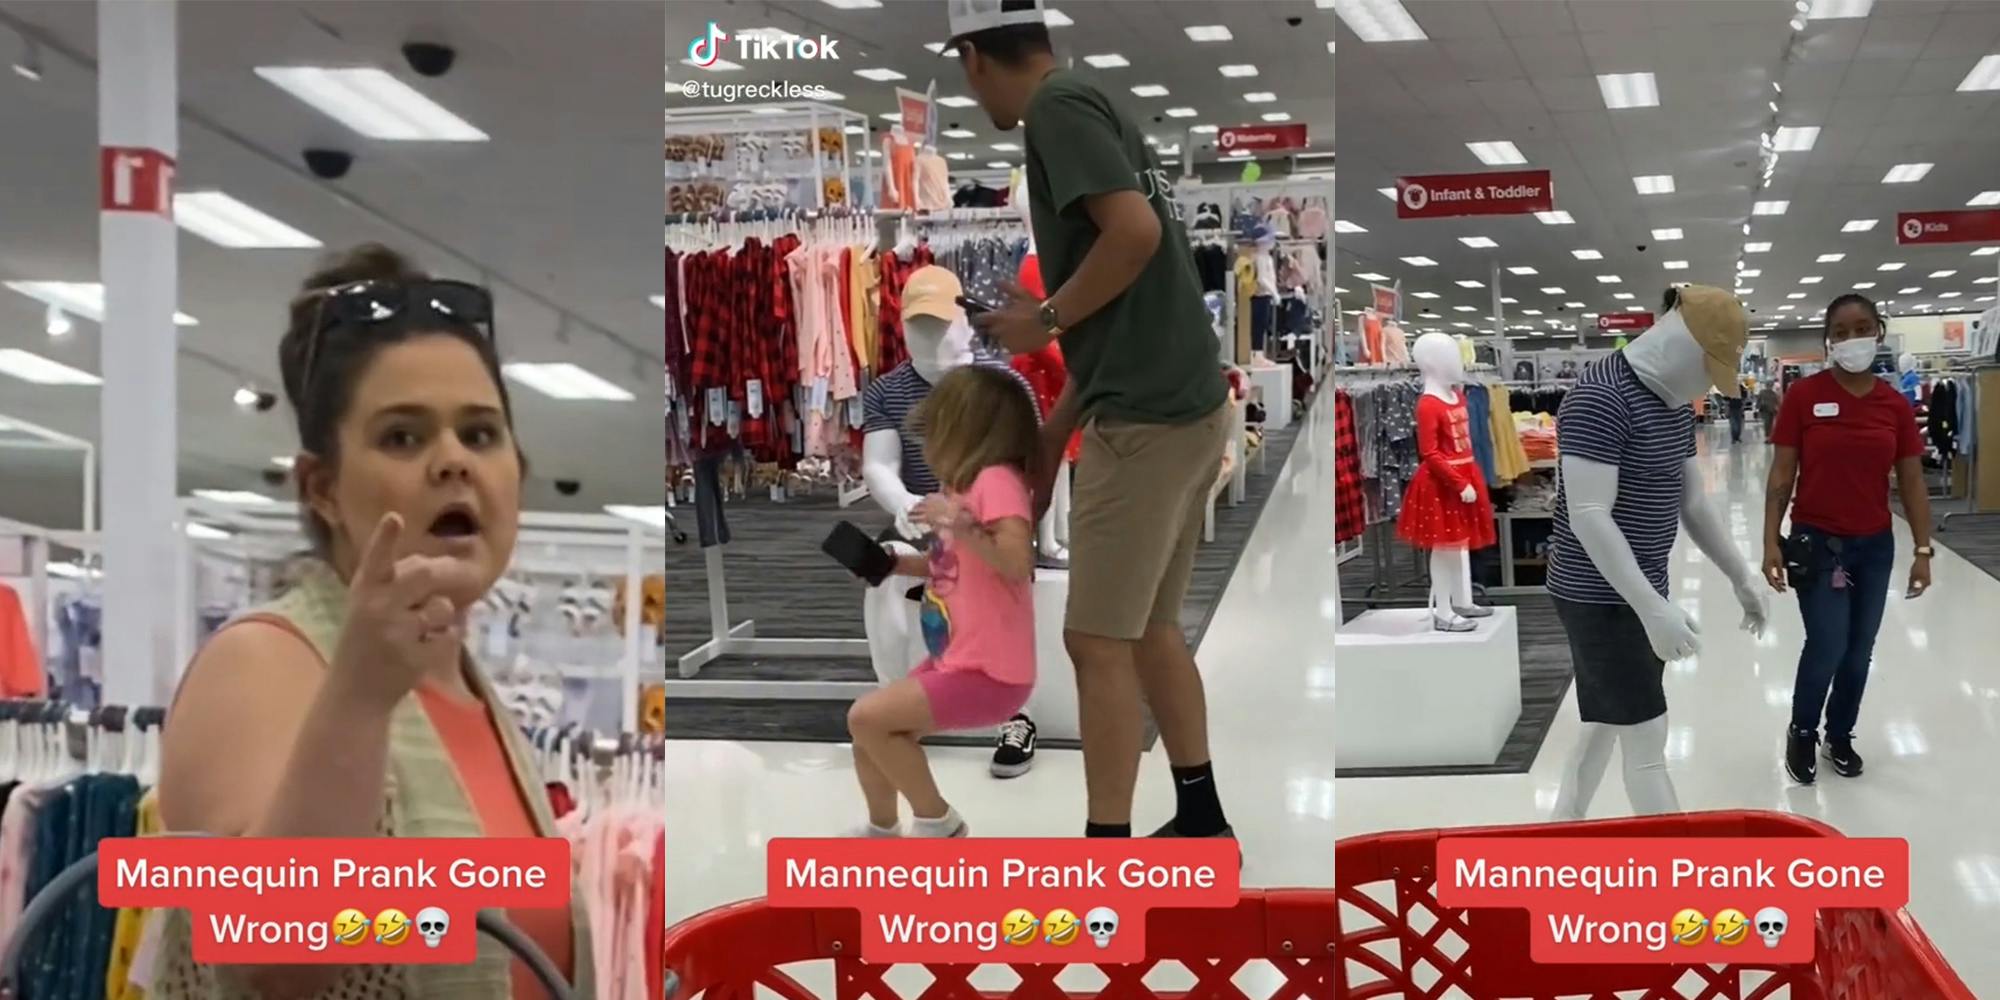 woman pointing (l) girl stumbling in front of man (c) man dressed as mannequin walking with head hanging in shame (r) all with caption "mannequin prank gone wrong"